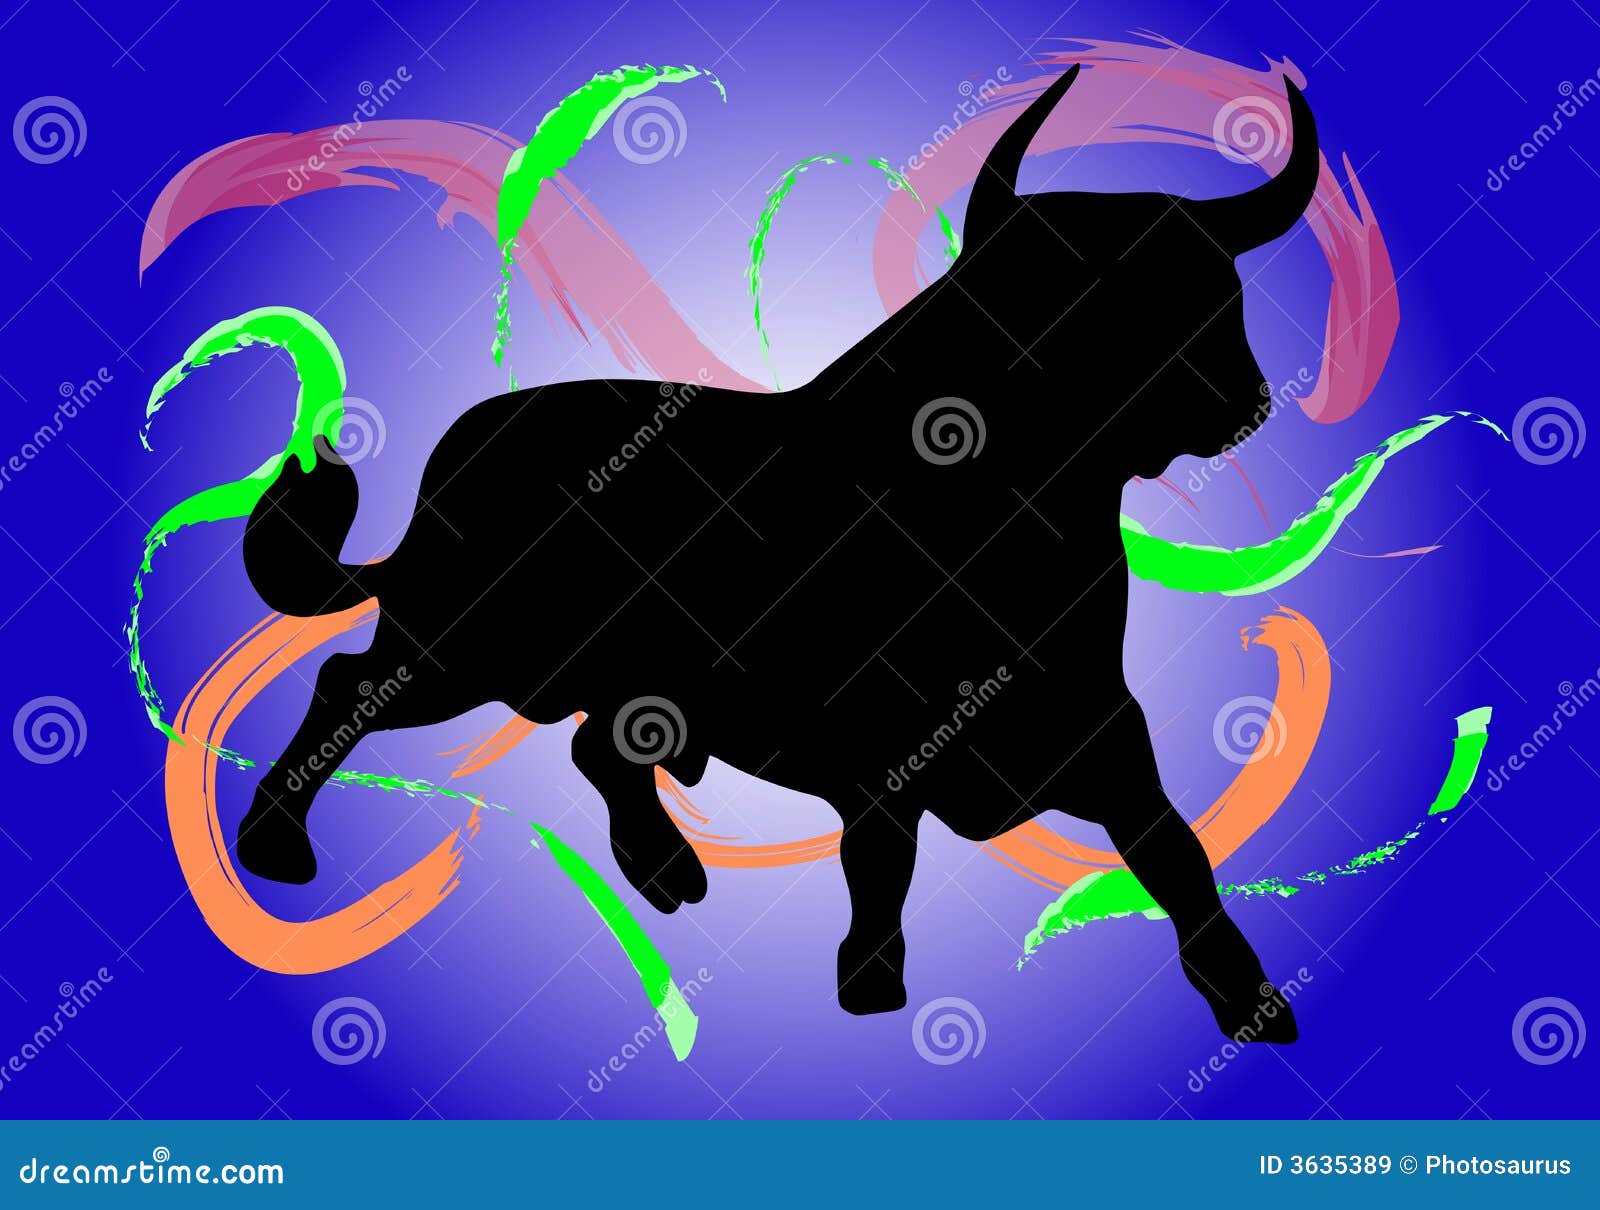 bull with different colors